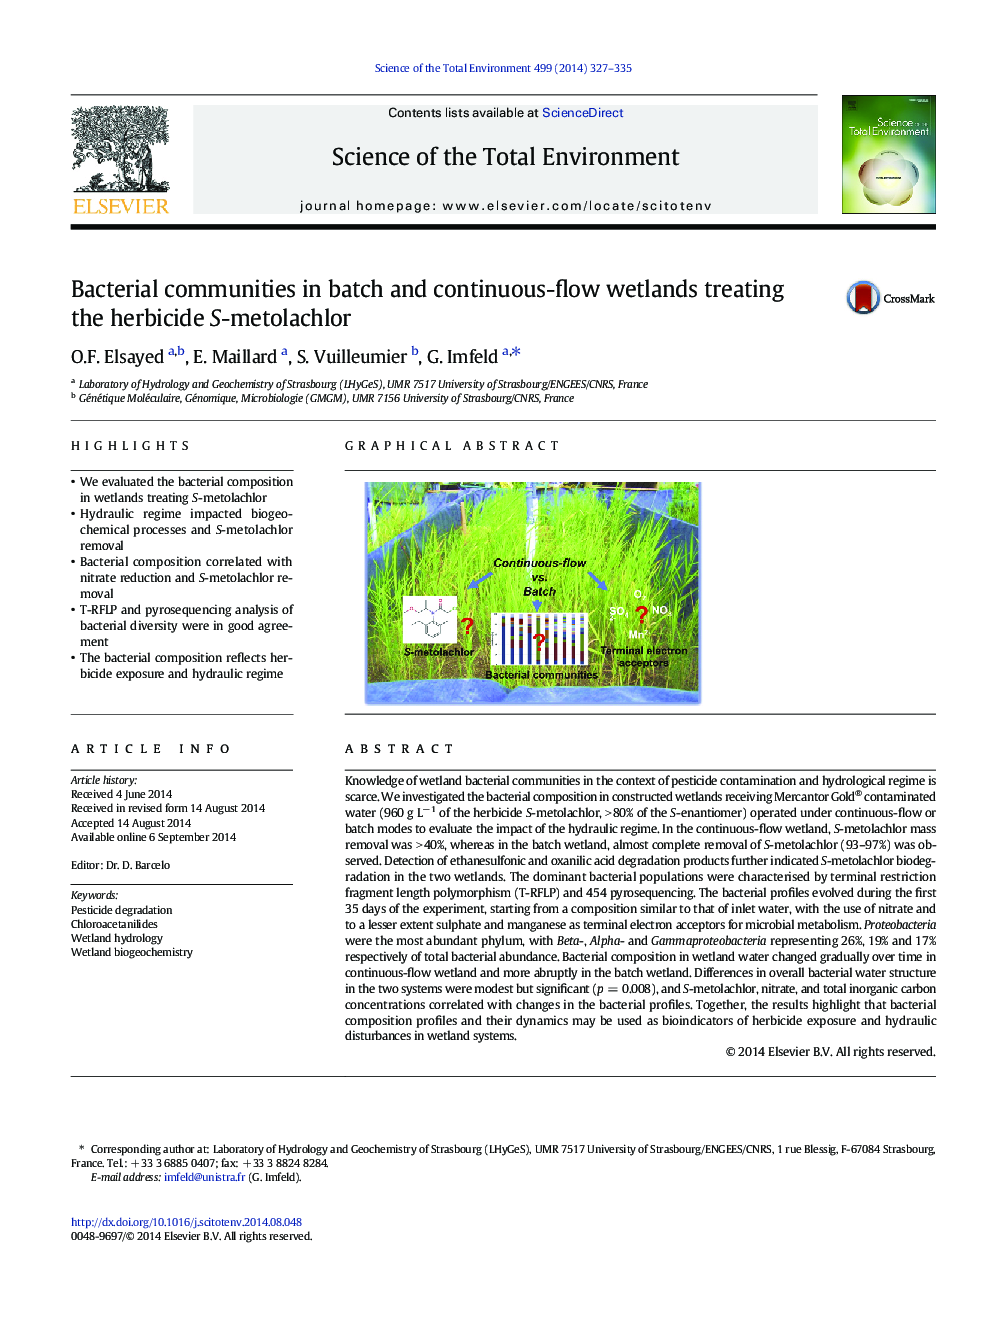 Bacterial communities in batch and continuous-flow wetlands treating the herbicide S-metolachlor